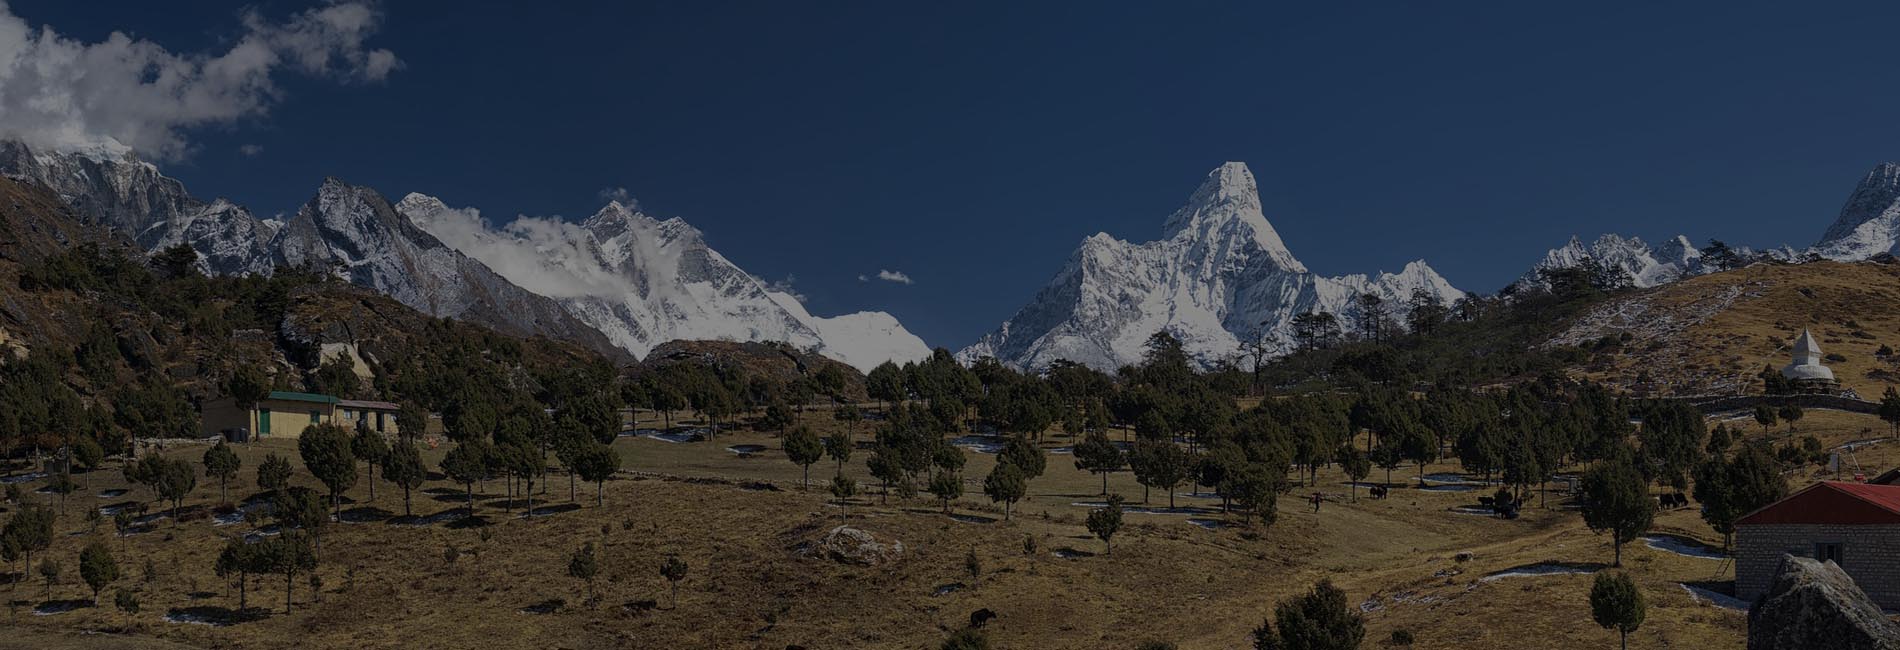 10 reasons why you should visit Nepal